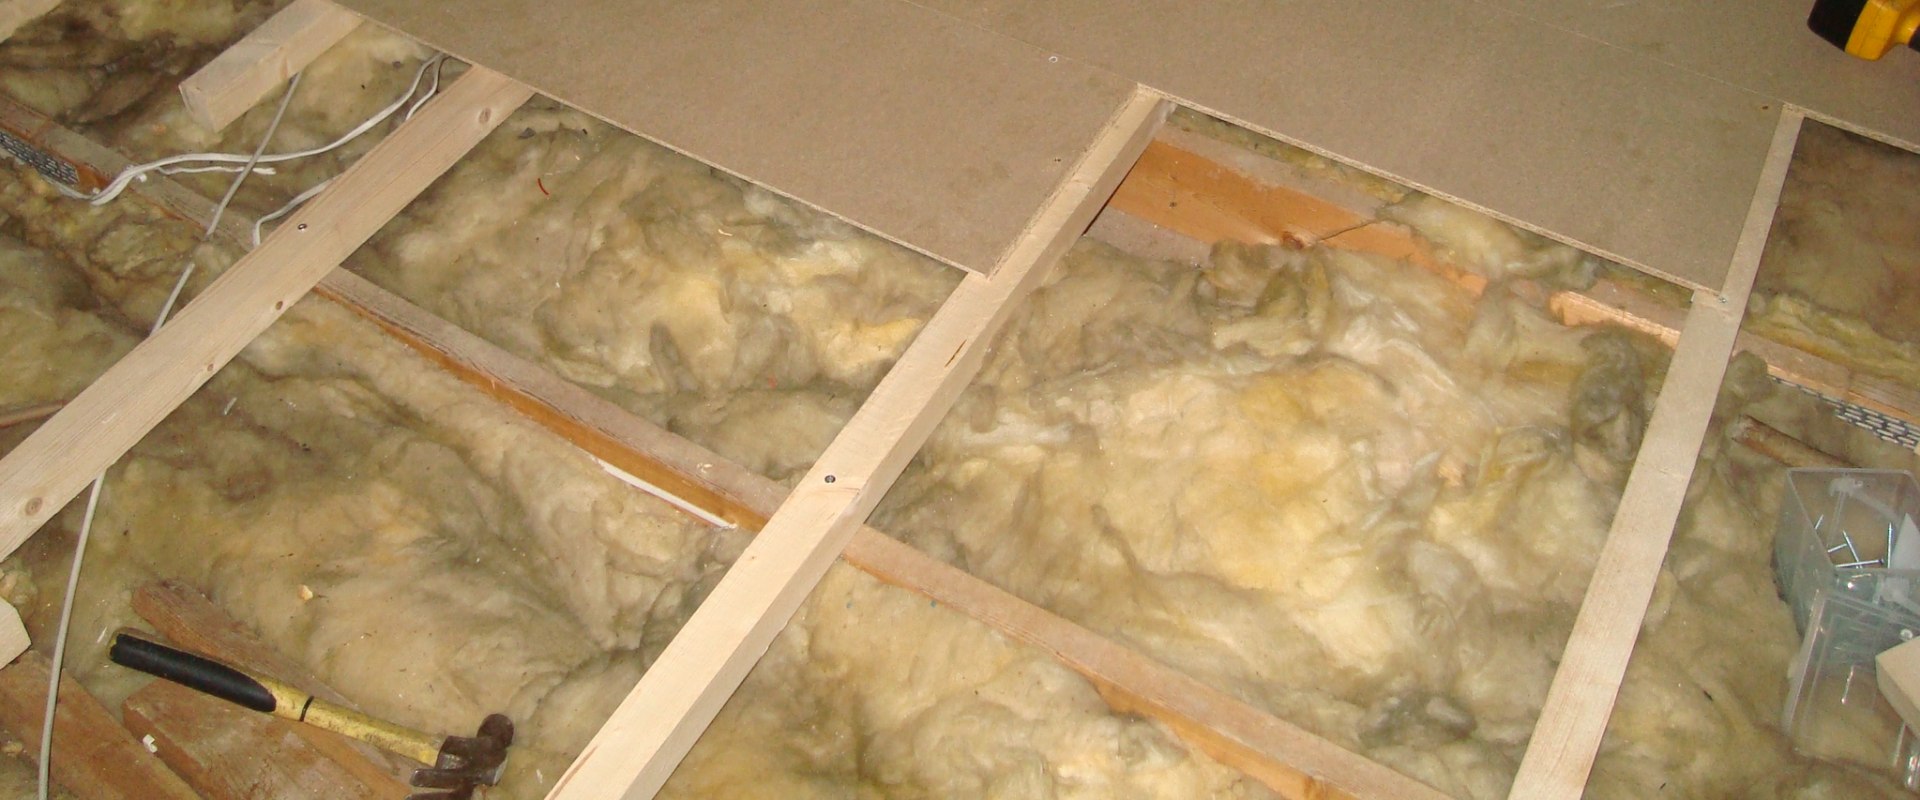 Insulation: Does it Really Make a Difference?